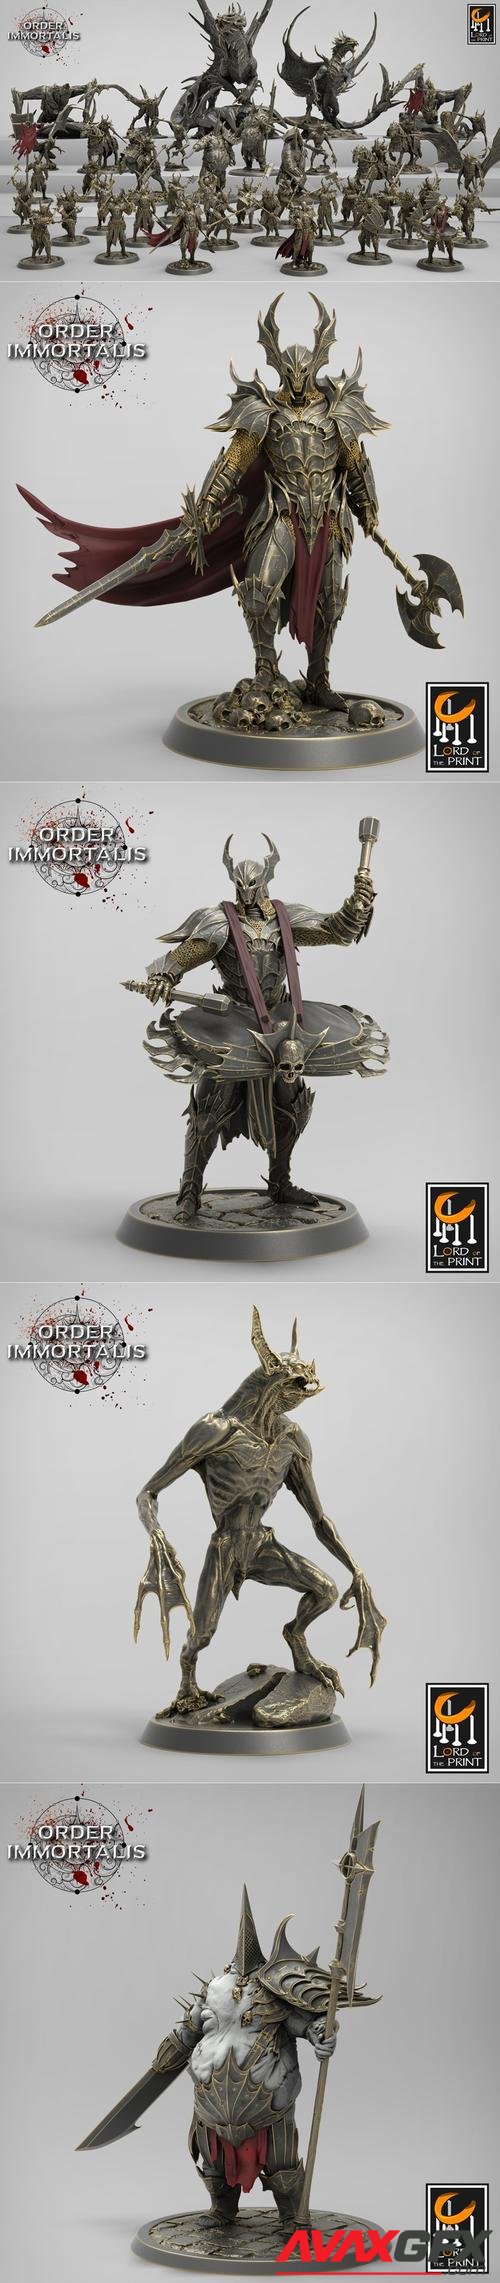 Lord of the Print - Order Immortalis – 3D Print